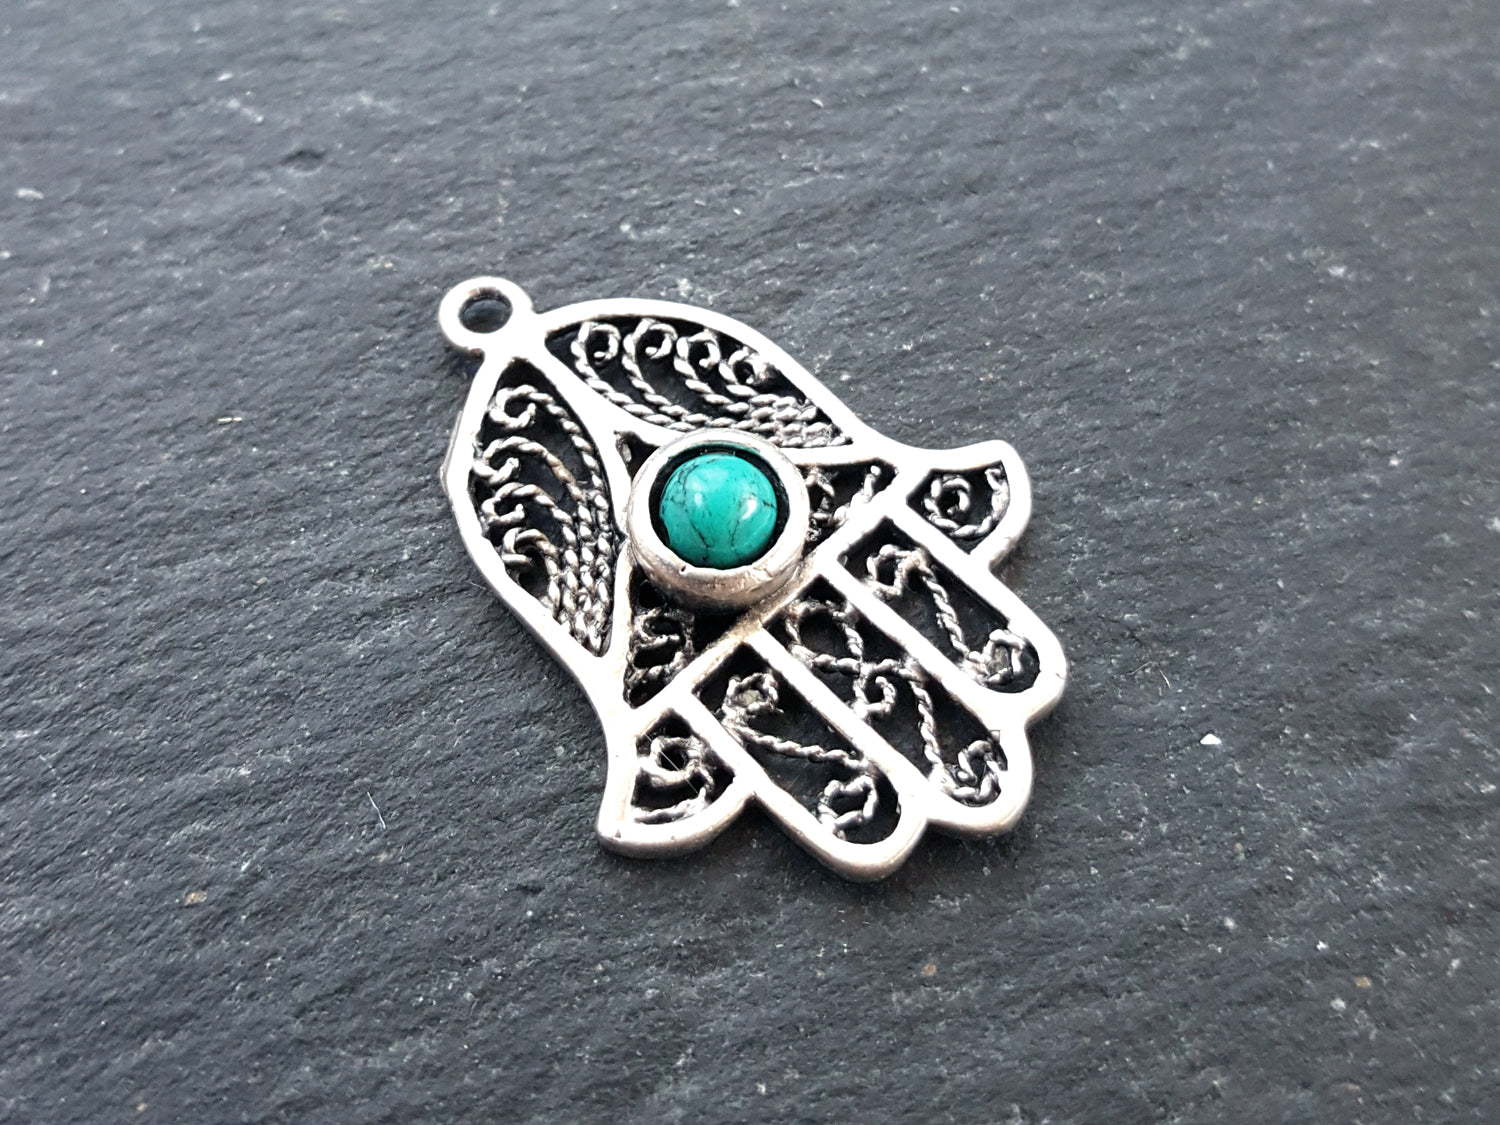 Filigree Hand of Fatima Hamsa Pendant Charm with Smooth Turquoise Stone Accent - Antique Matte Silver Plated